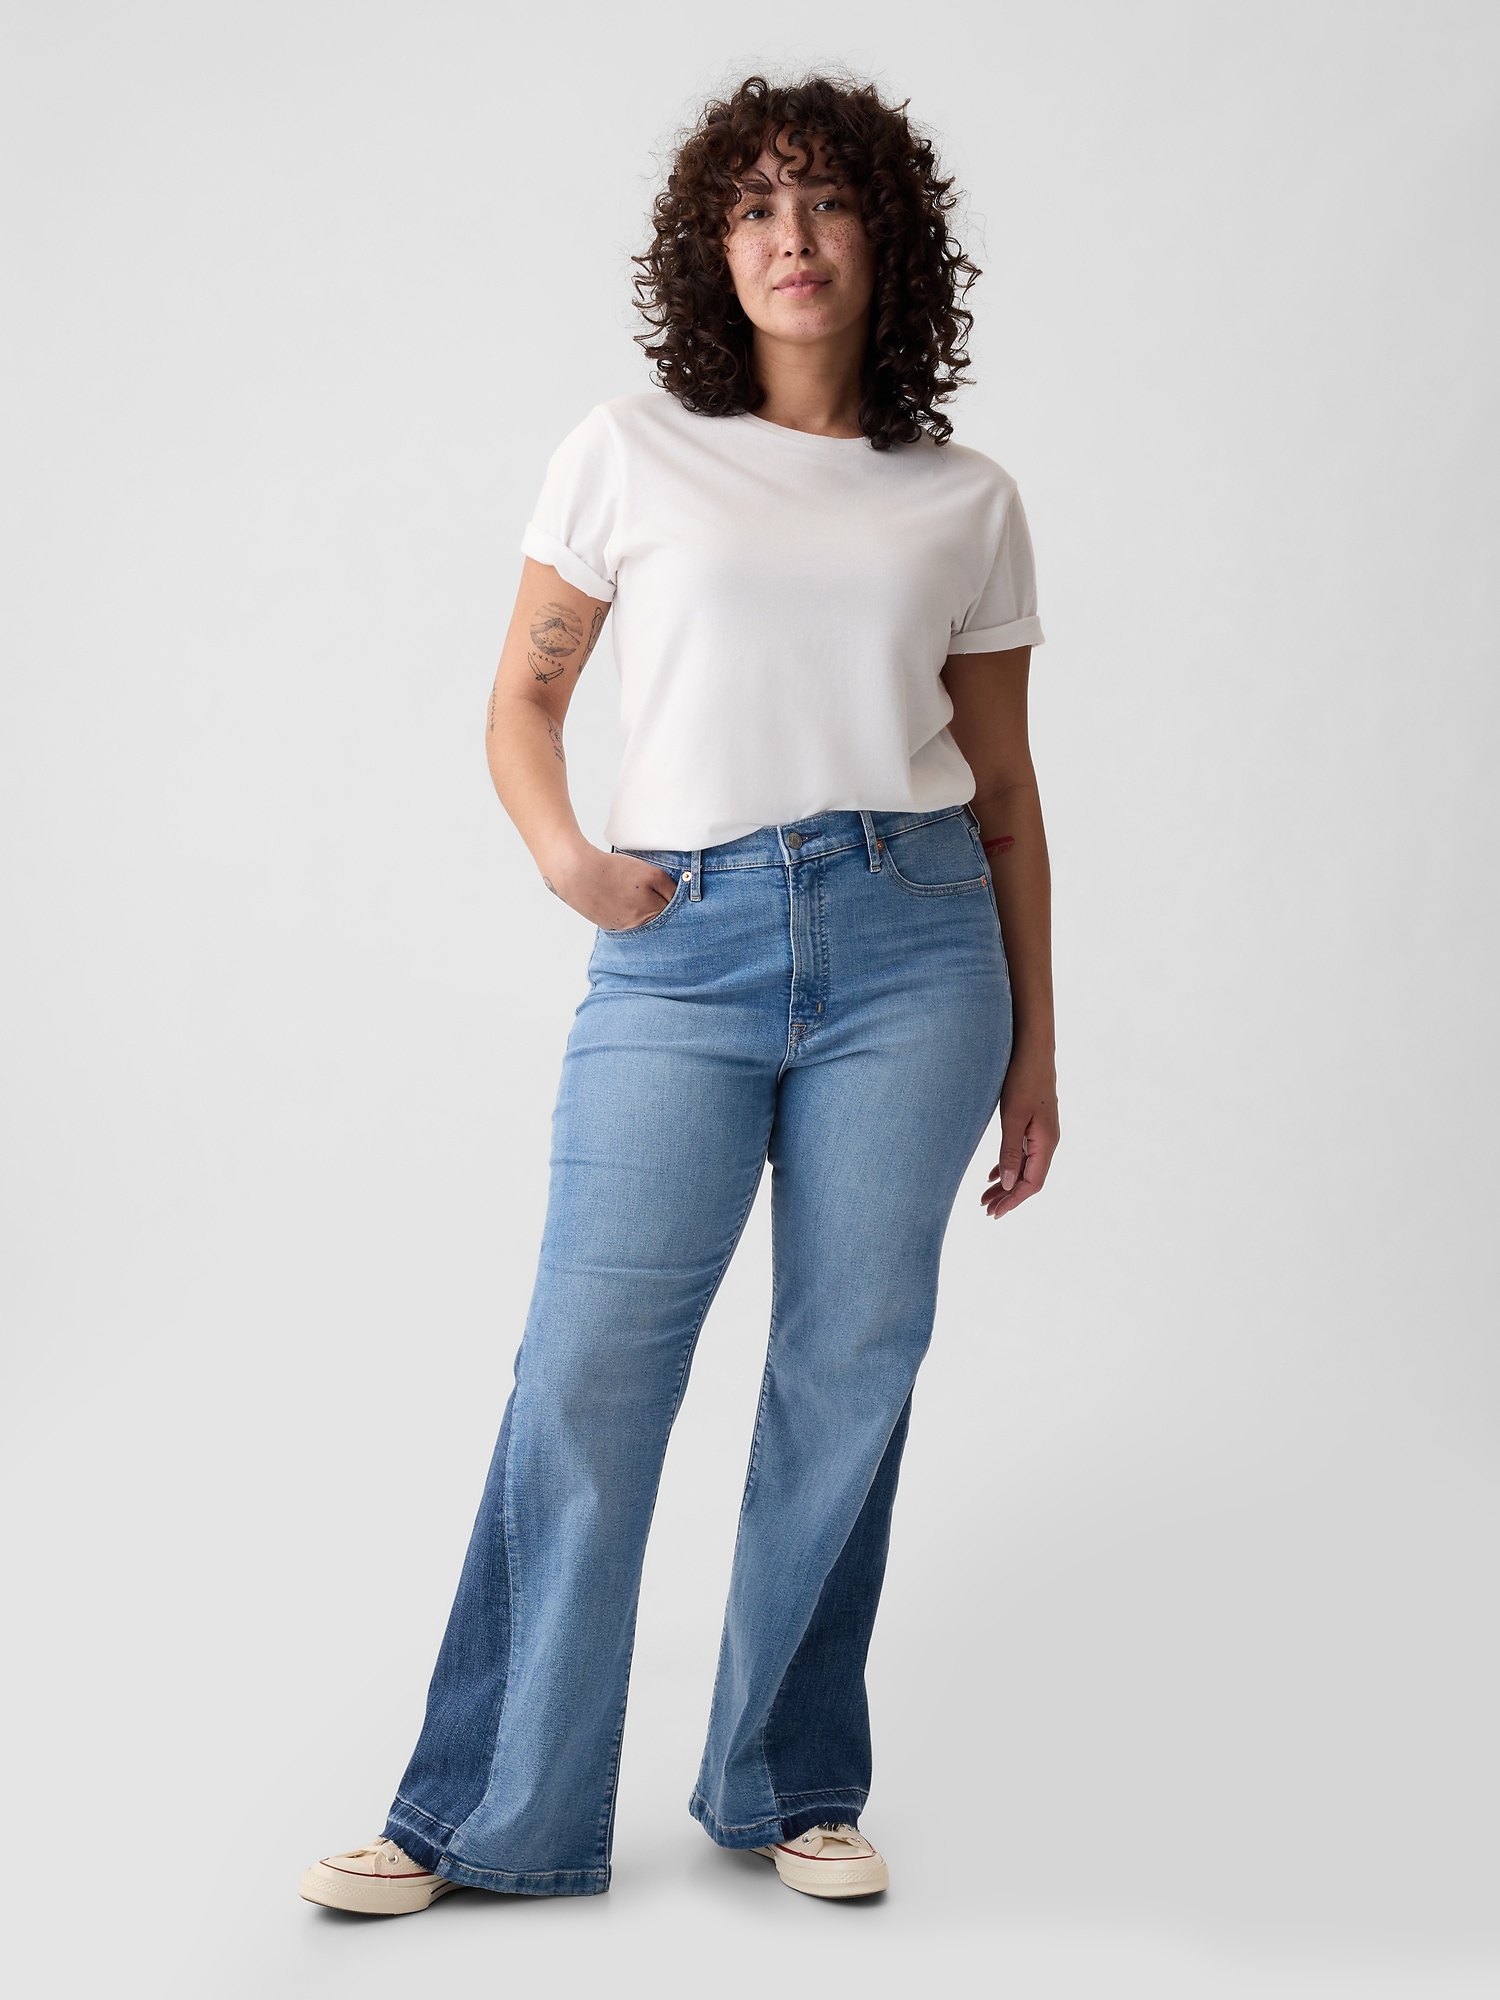 Small 70s High Waisted Light Wash Flared Jeans 26 – Flying Apple